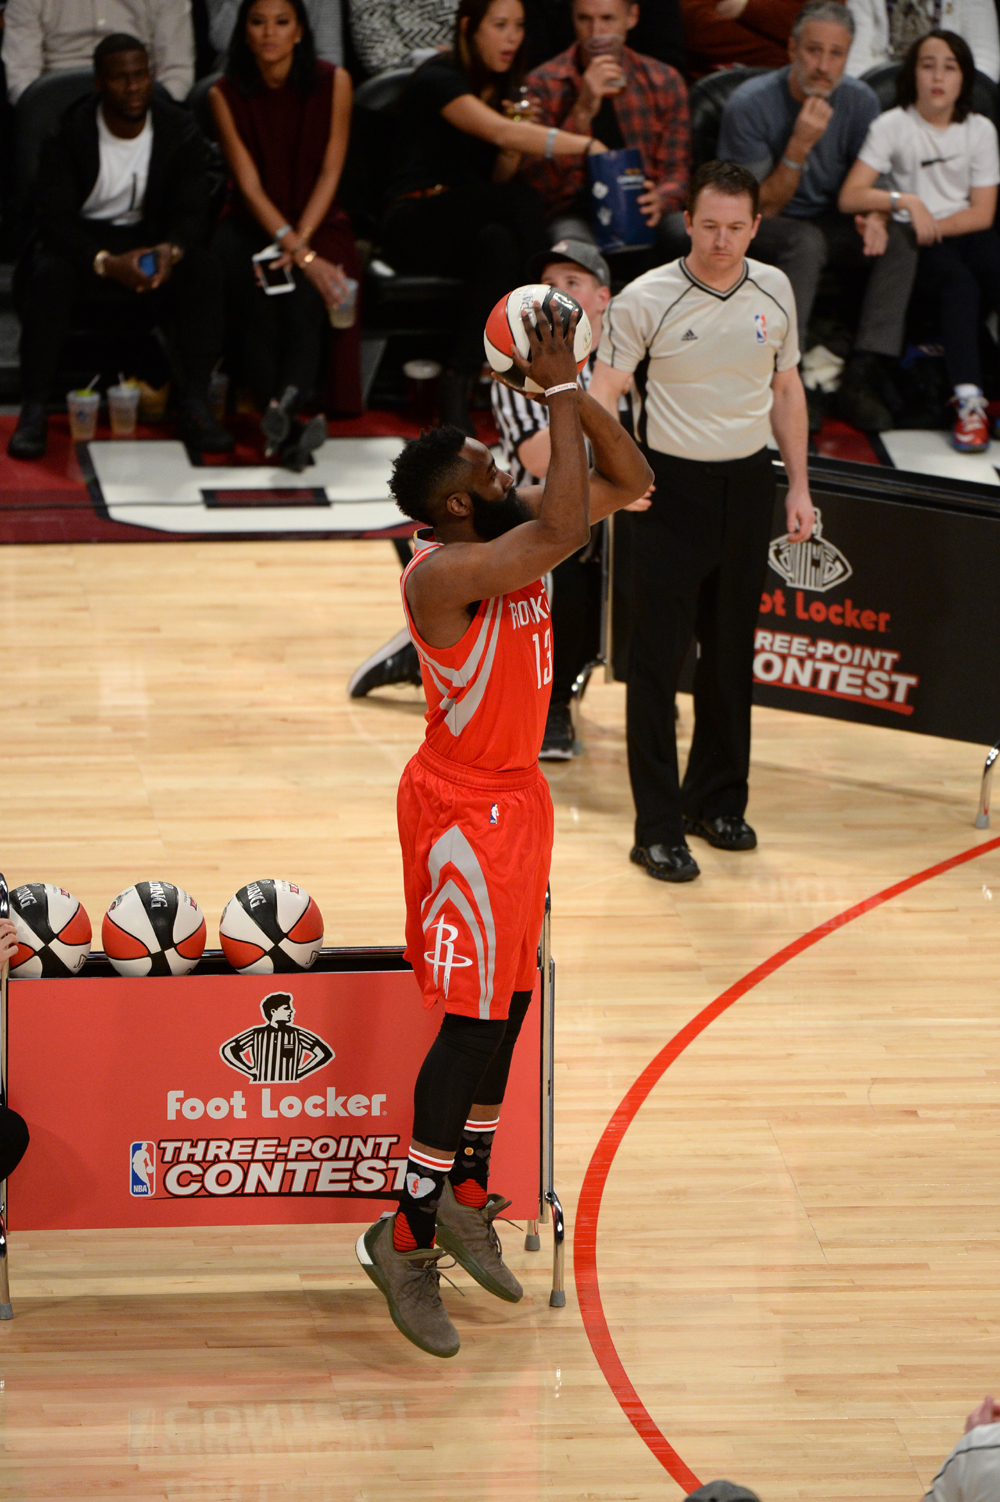 TORONTO, CANADA - FEBRUARY 13: James Harden #13 of the Houston Rockets shoots during the Foot Locker Three-Point Contest as part of 2016 NBA All-Star Weekend on February 13, 2016 at the Air Canada Centre in Toronto, Ontario, Canada. NOTE TO USER: User expressly acknowledges and agrees that, by downloading and or using this Photograph, user is consenting to the terms and conditions of the Getty Images License Agreement. Mandatory Copyright Notice: Copyright 2016 NBAE (Photo by Garrett Ellwood/NBAE via Getty Images)